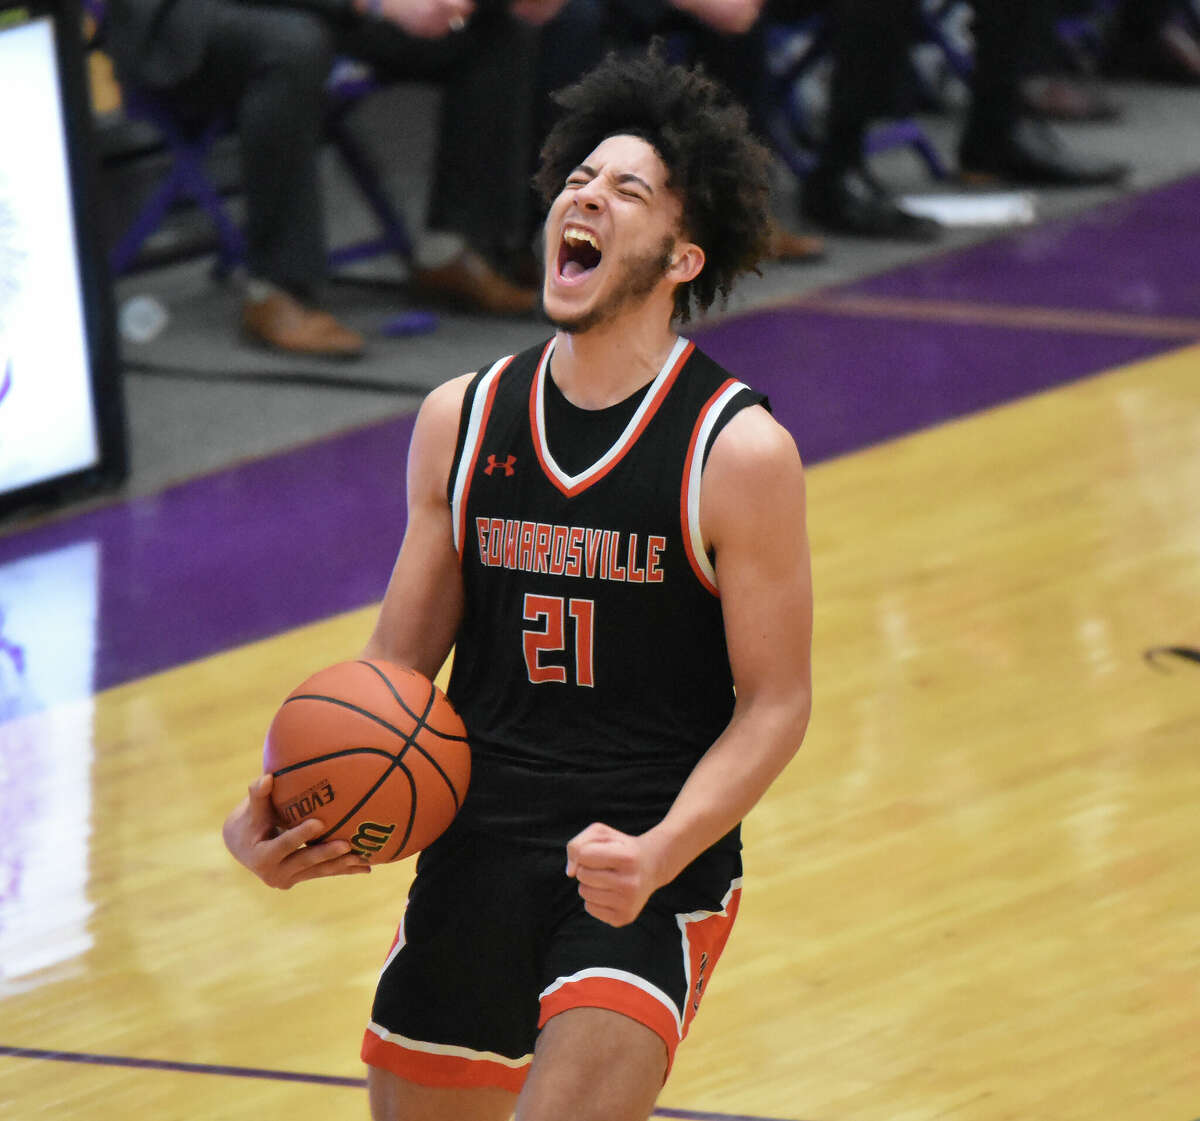 Edwardsville's Isayah Kloster celebrates the win over Collinsville on Friday in Southwestern Conference action inside Vergil Fletcher Gymnasium.